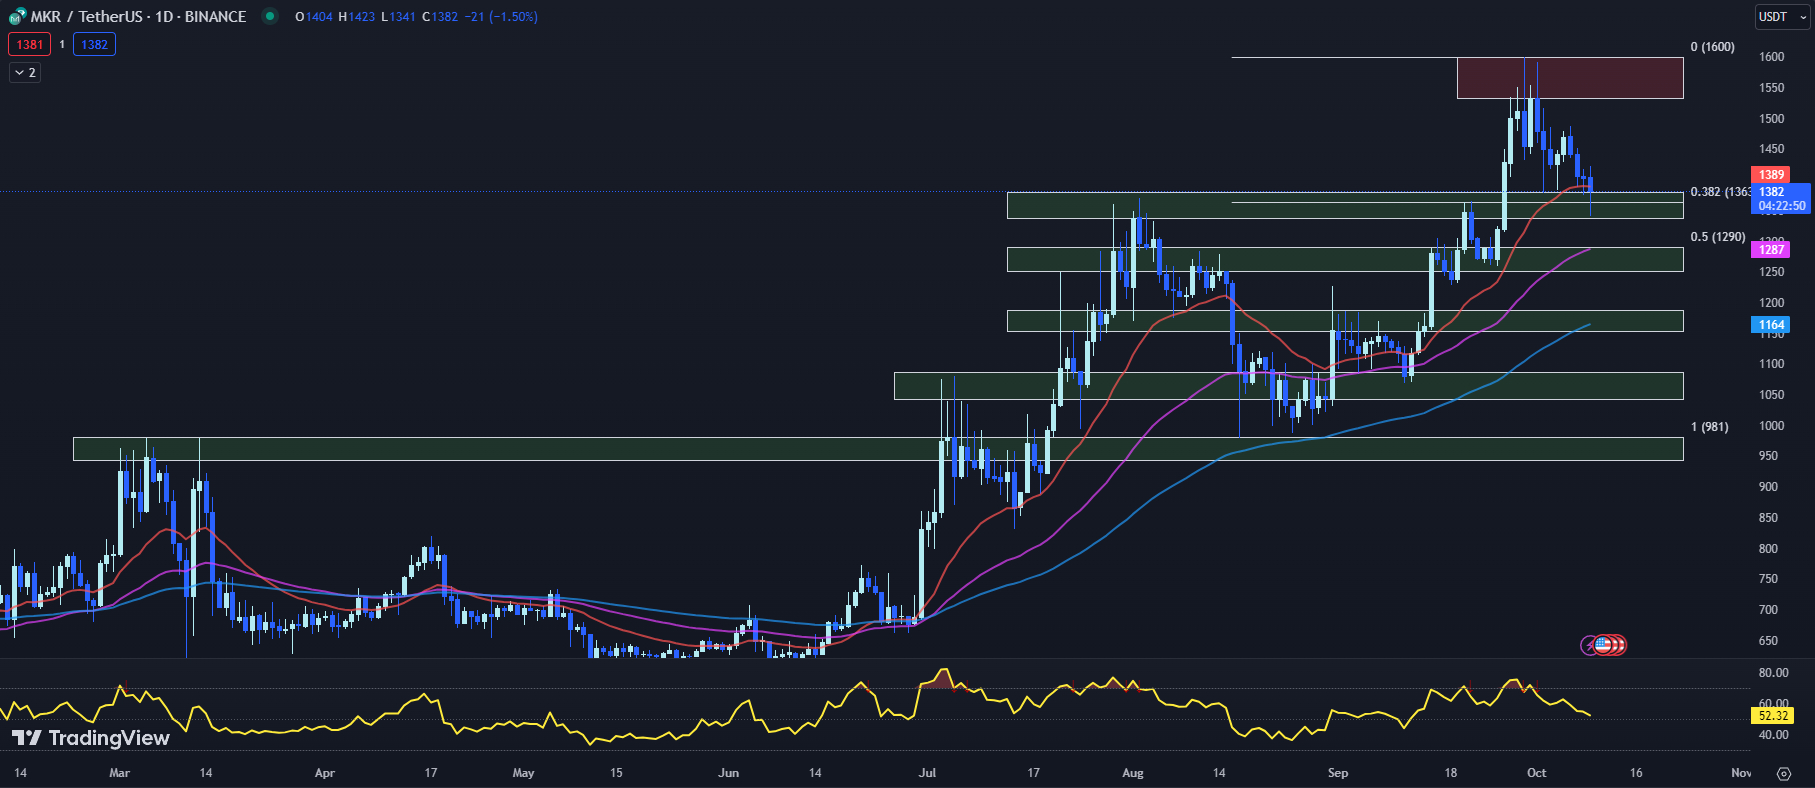 TradingView chart for the MKR price 10-09-23